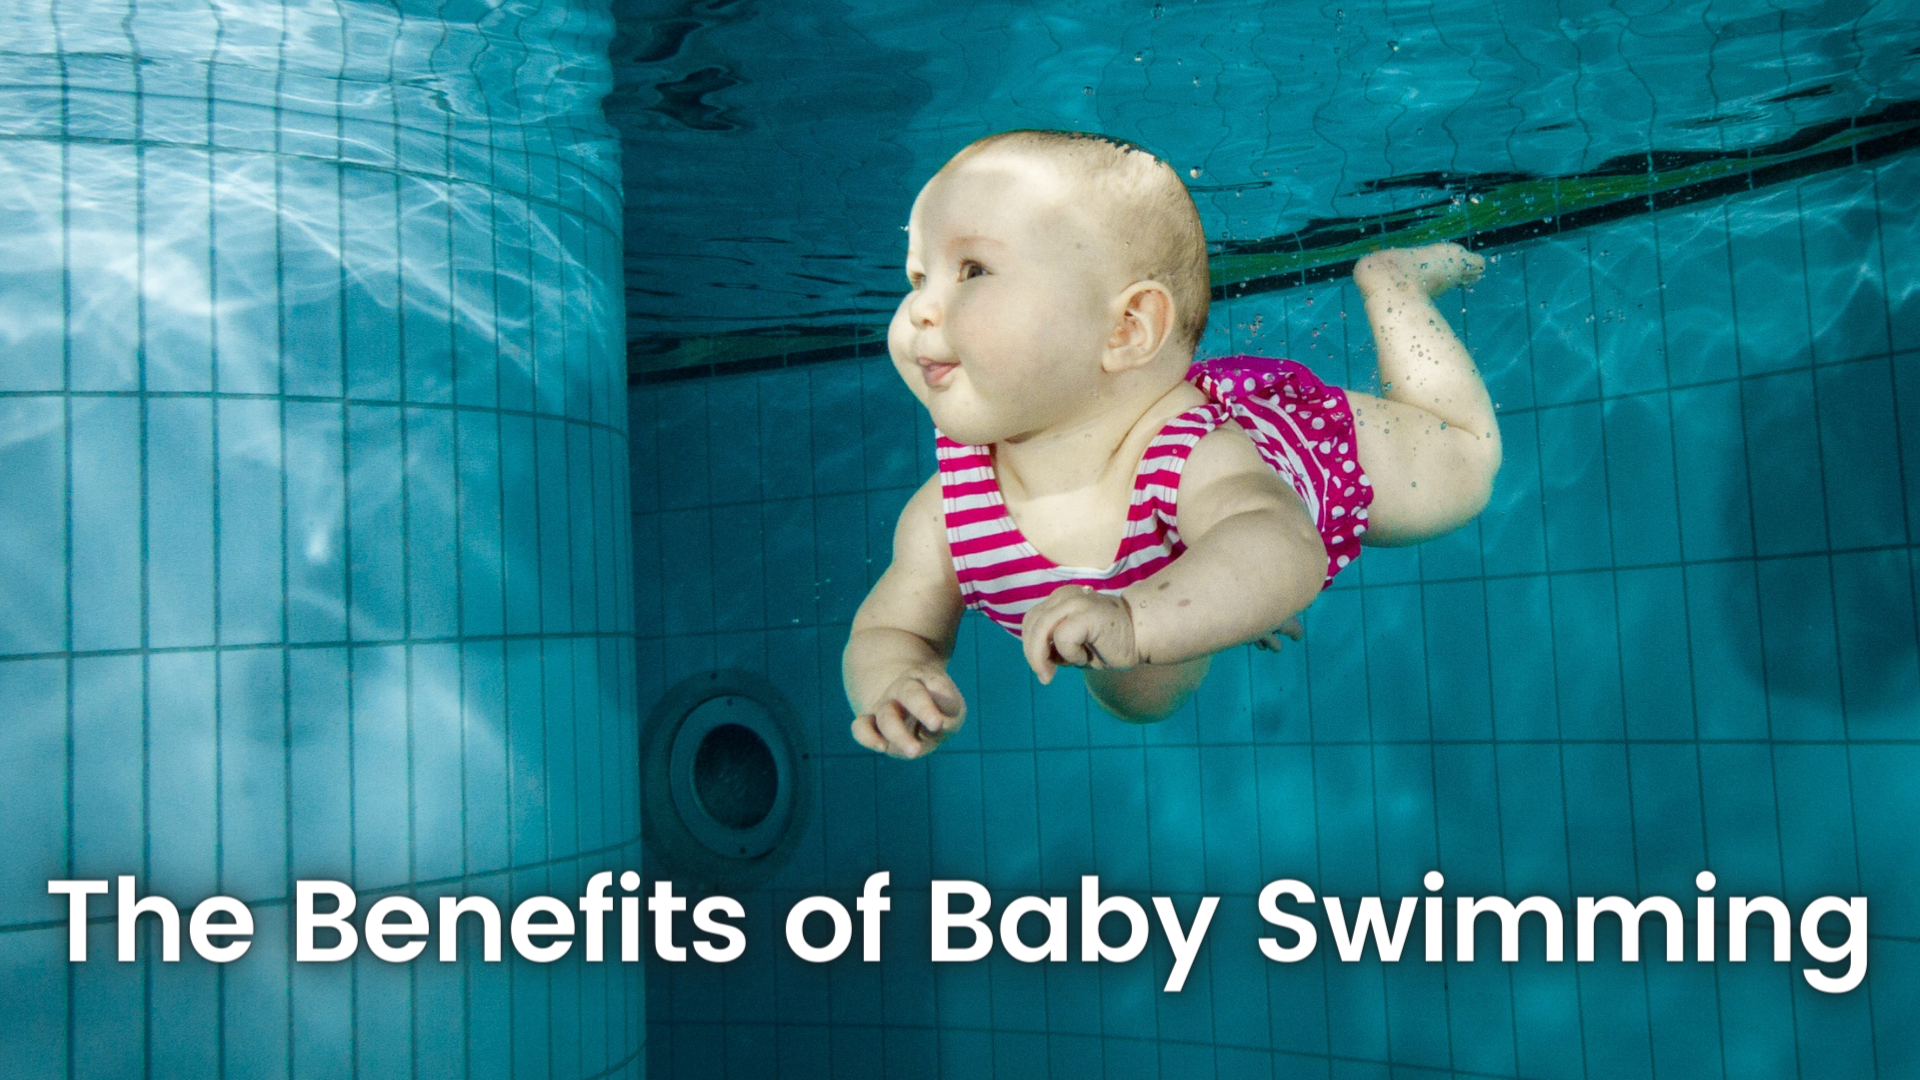 The Benefits of Baby Swimming